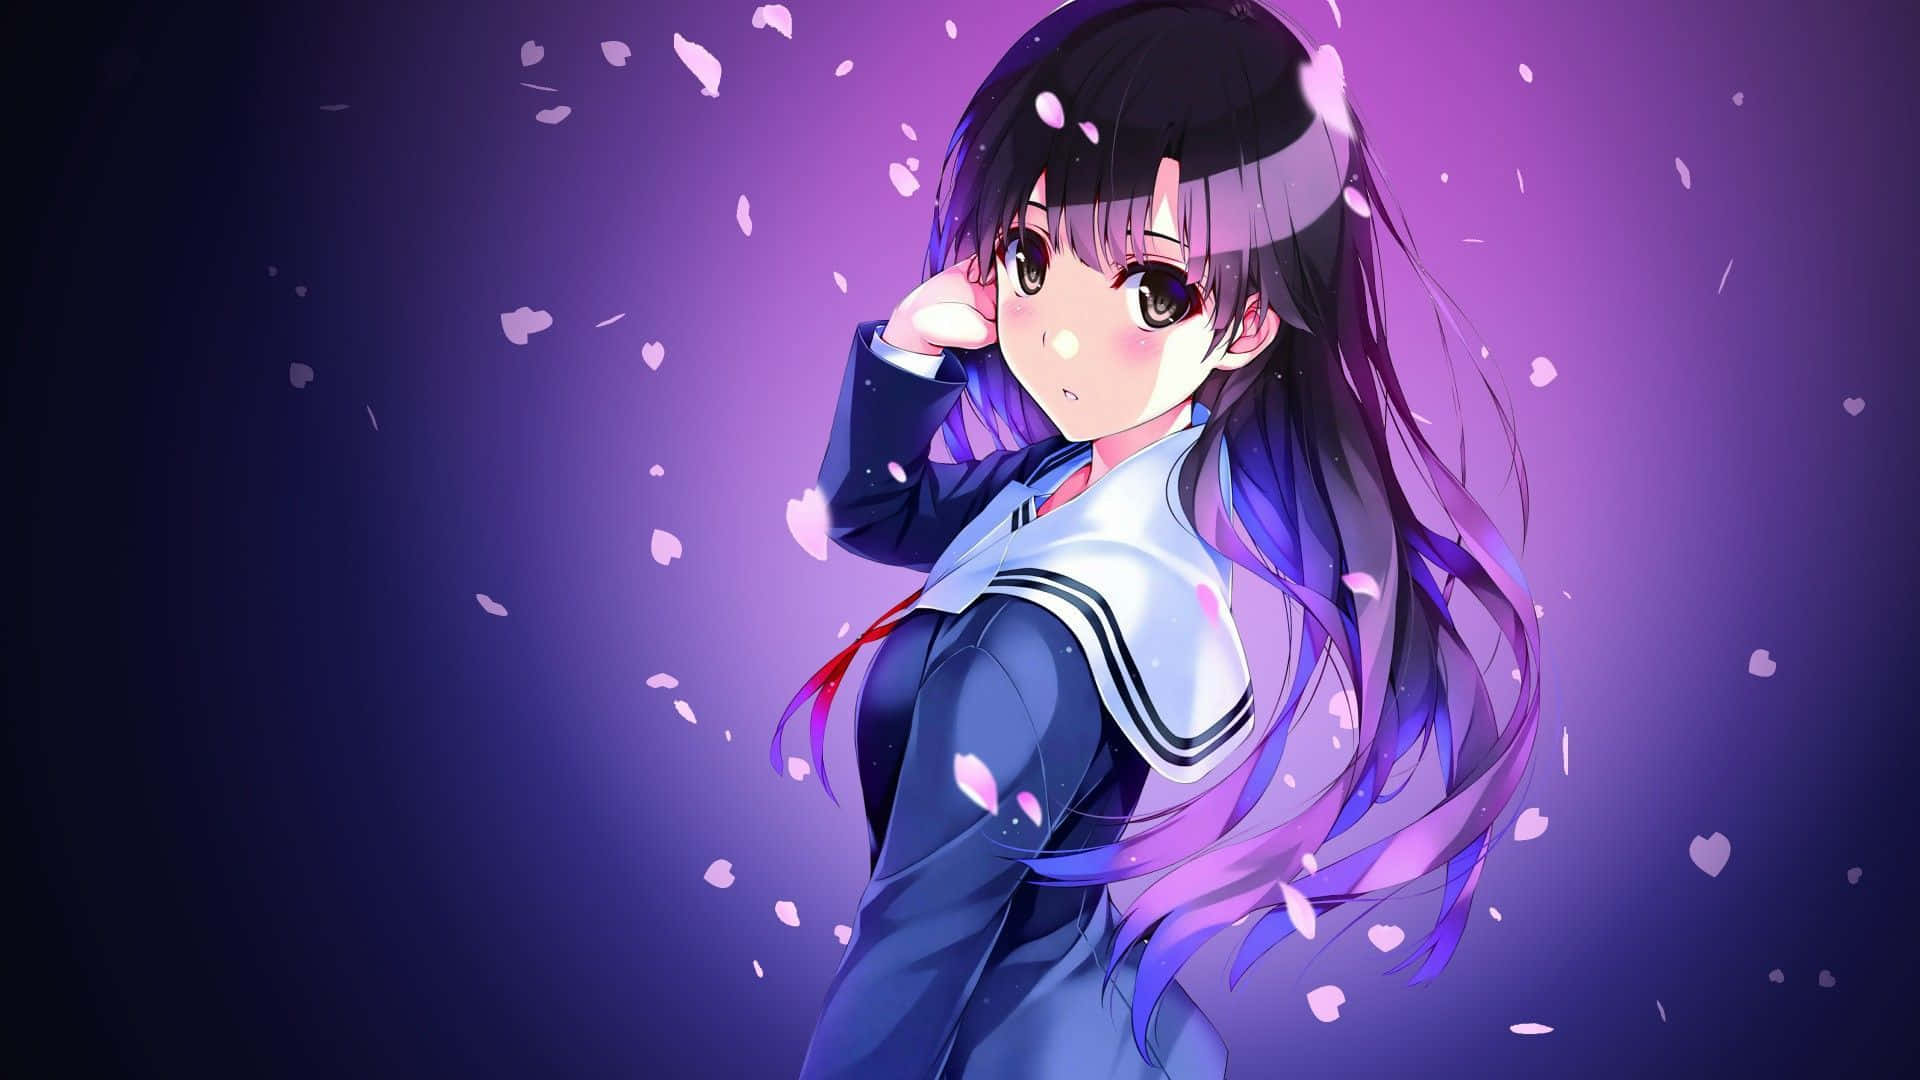 Fantasy Anime Girl in Purple Outfit Wallpaper